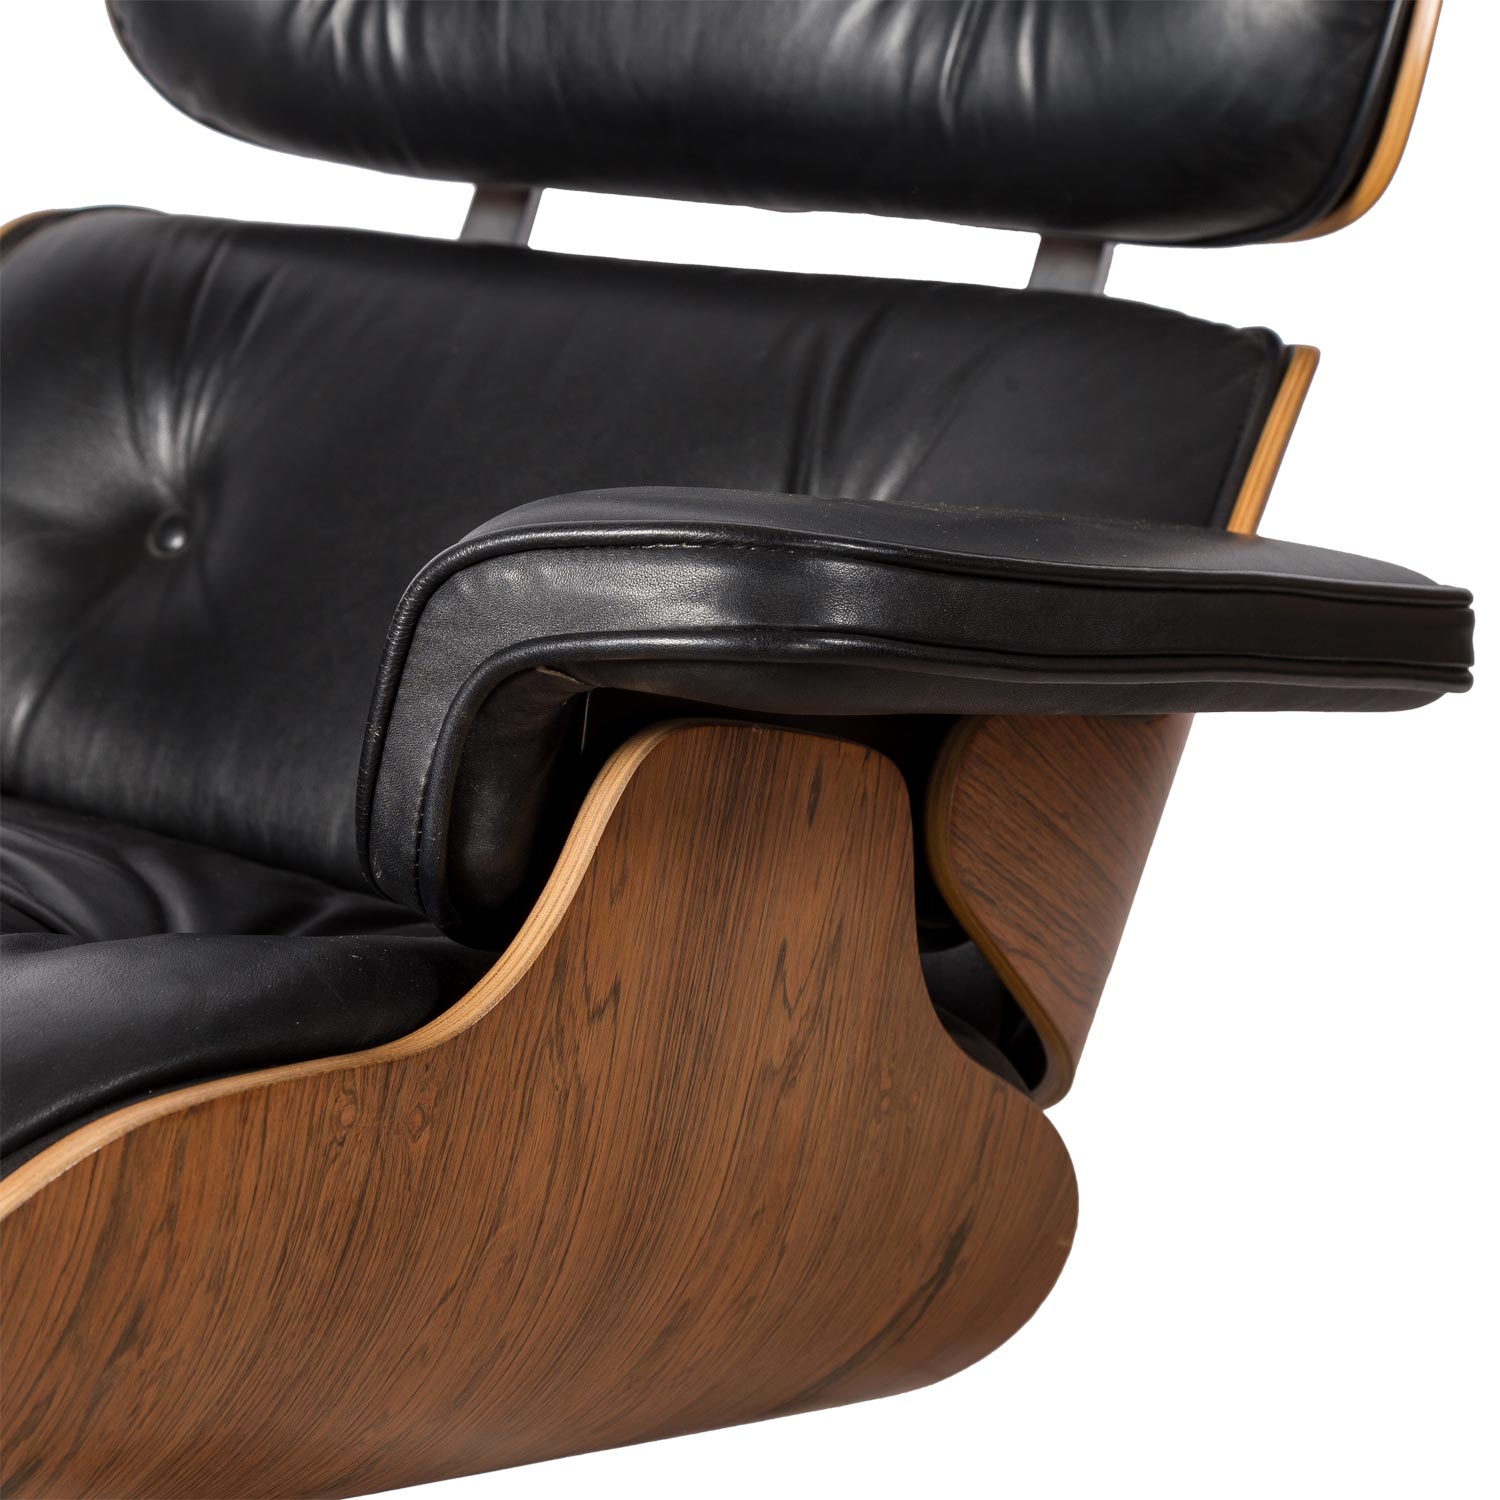 RAY & CHARLES EAMES "Lounge Chair mit Ottomane" - Image 6 of 8